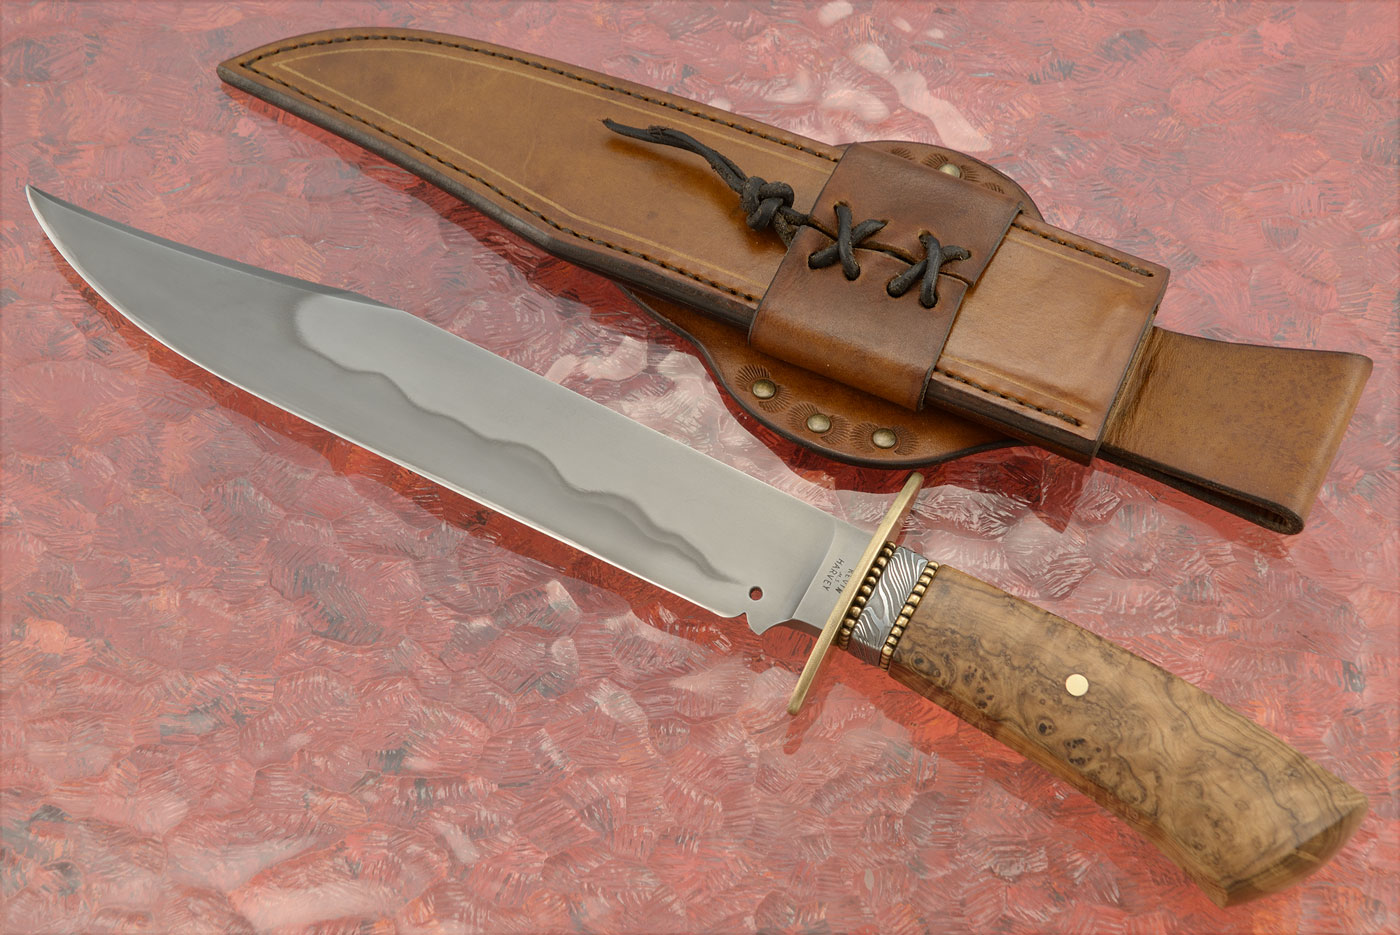 Forged Bowie with Hairy Vitex Burl